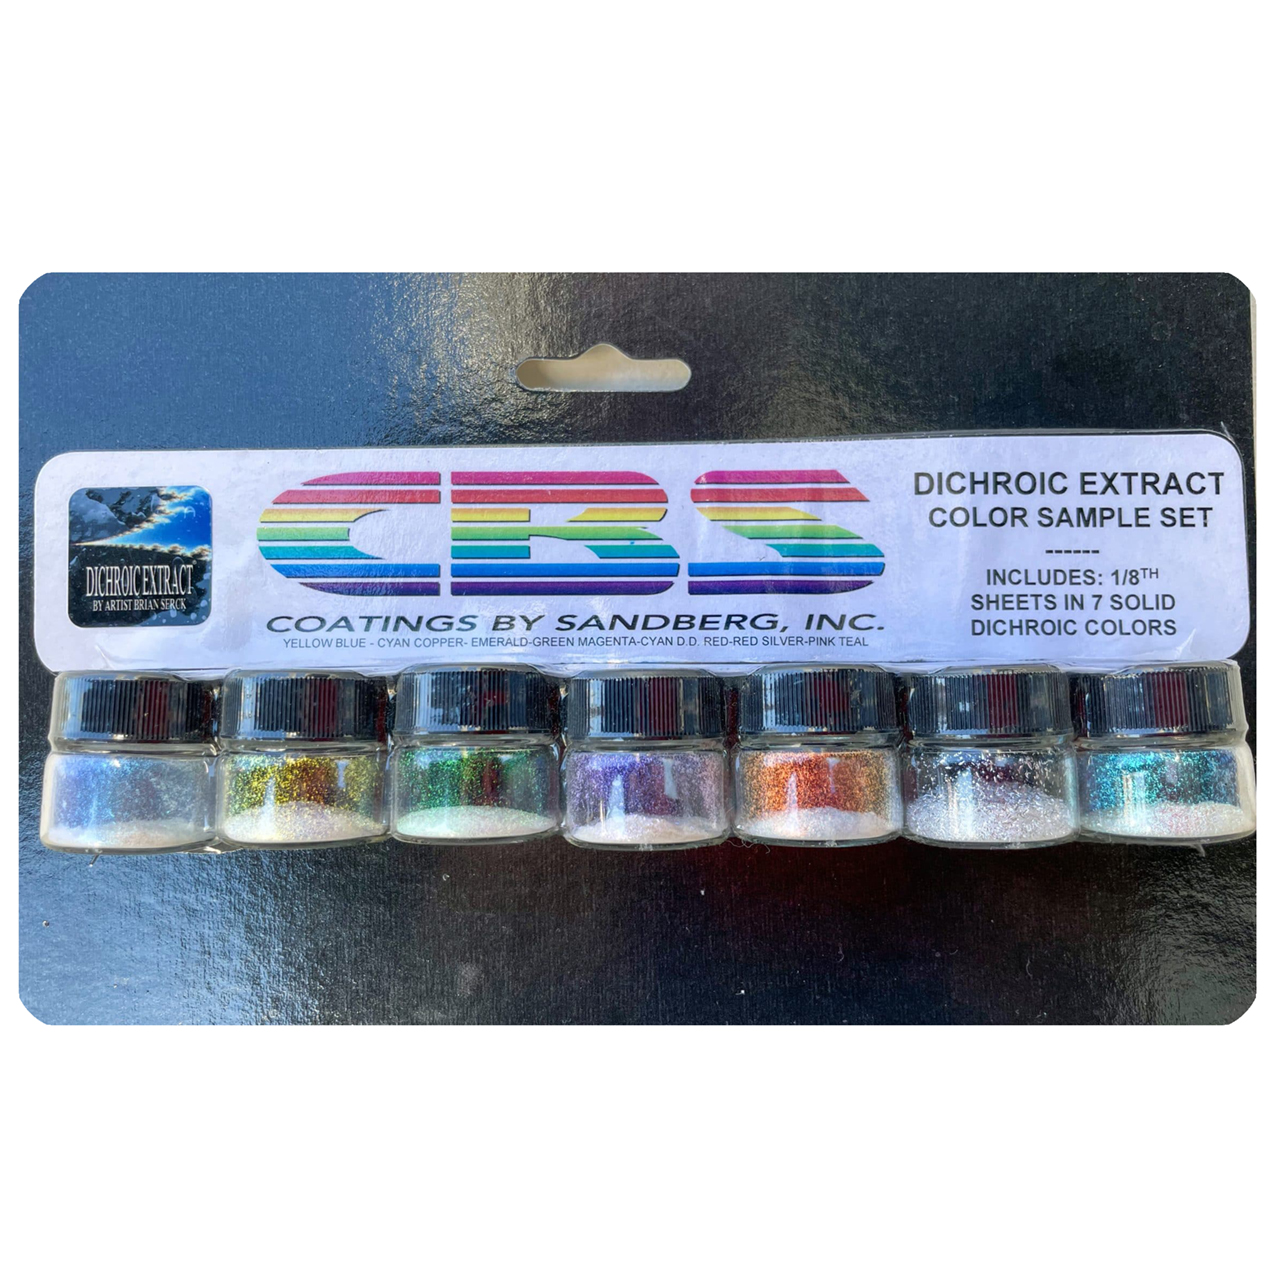 Dichroic EXTRACT color sample set